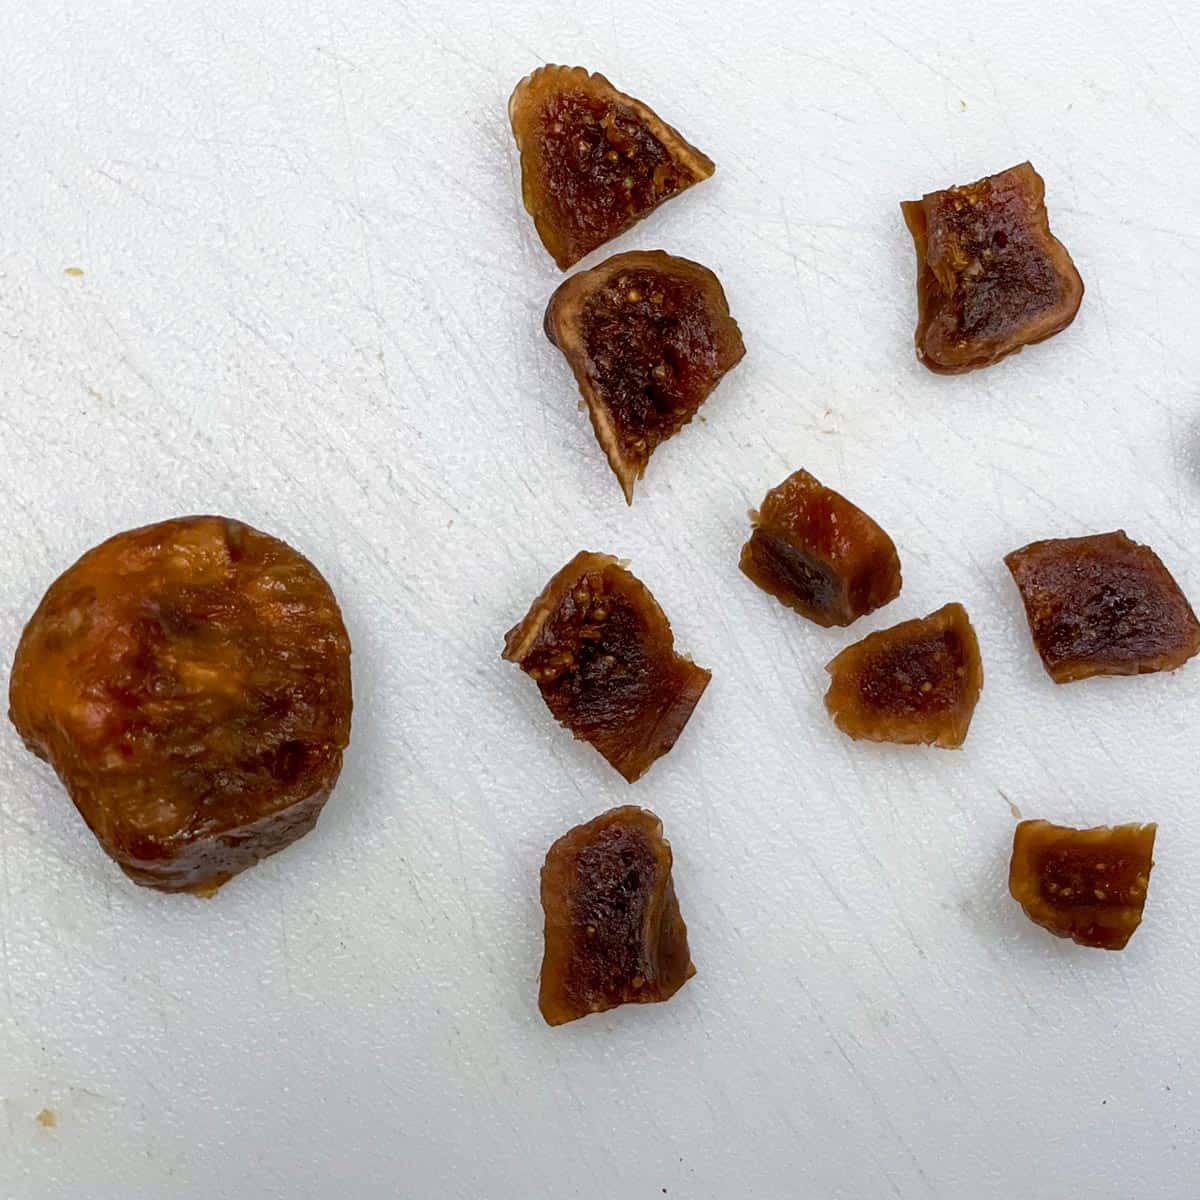 Cutting up a fig into cookie size pieces.